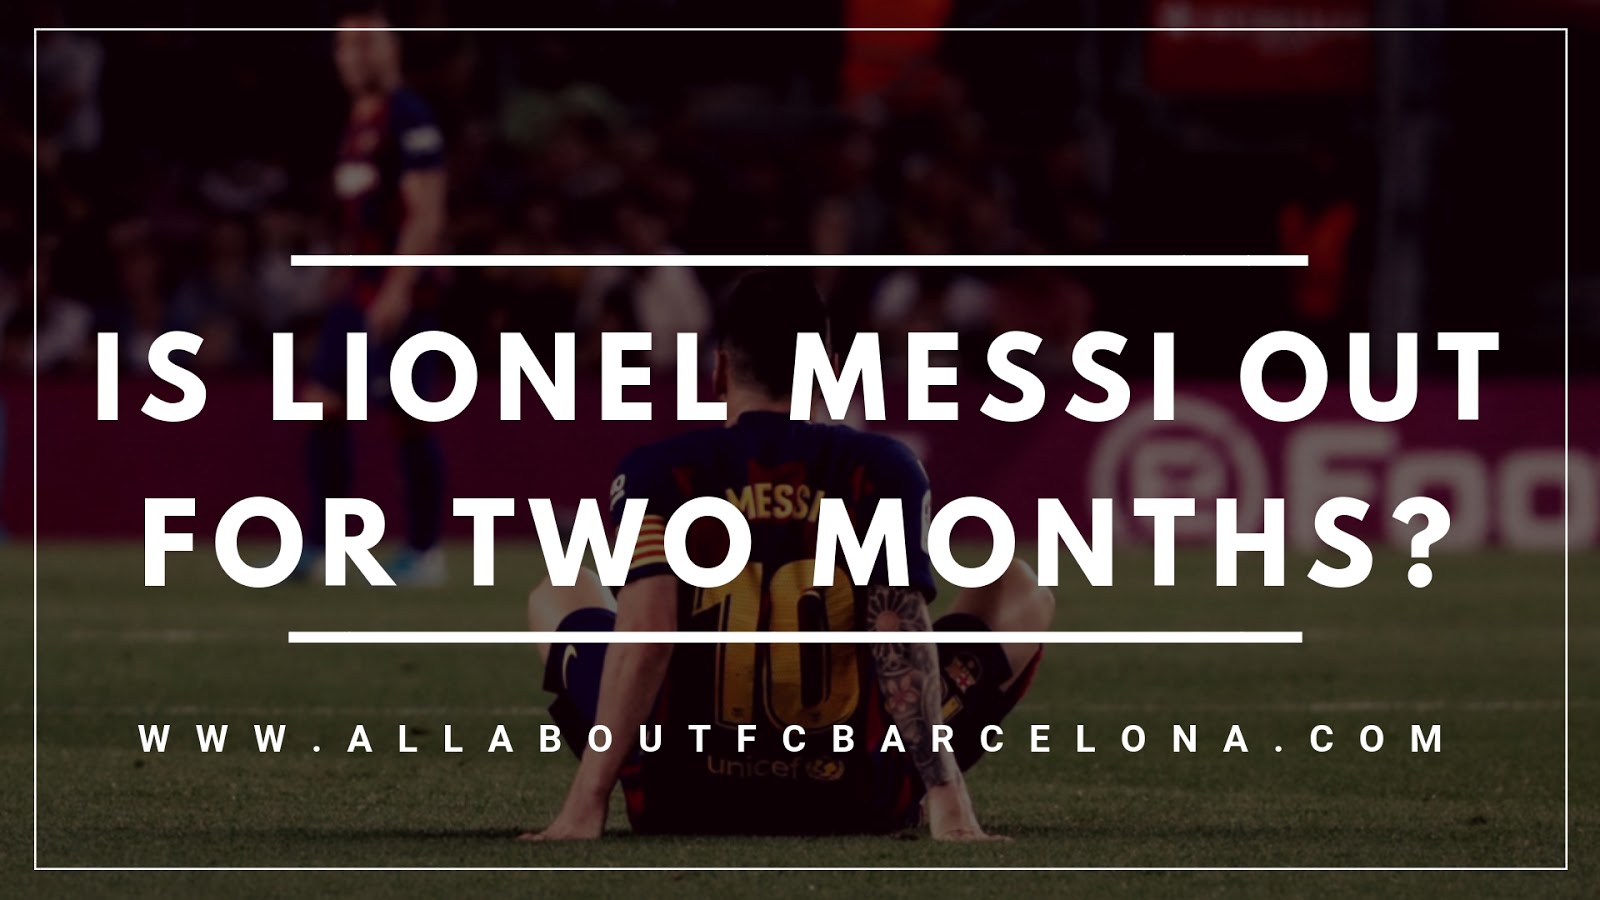 Lionel Messi Rumoured to be Sidelined for Two Months with the Latest Injury? #Barca #Messi